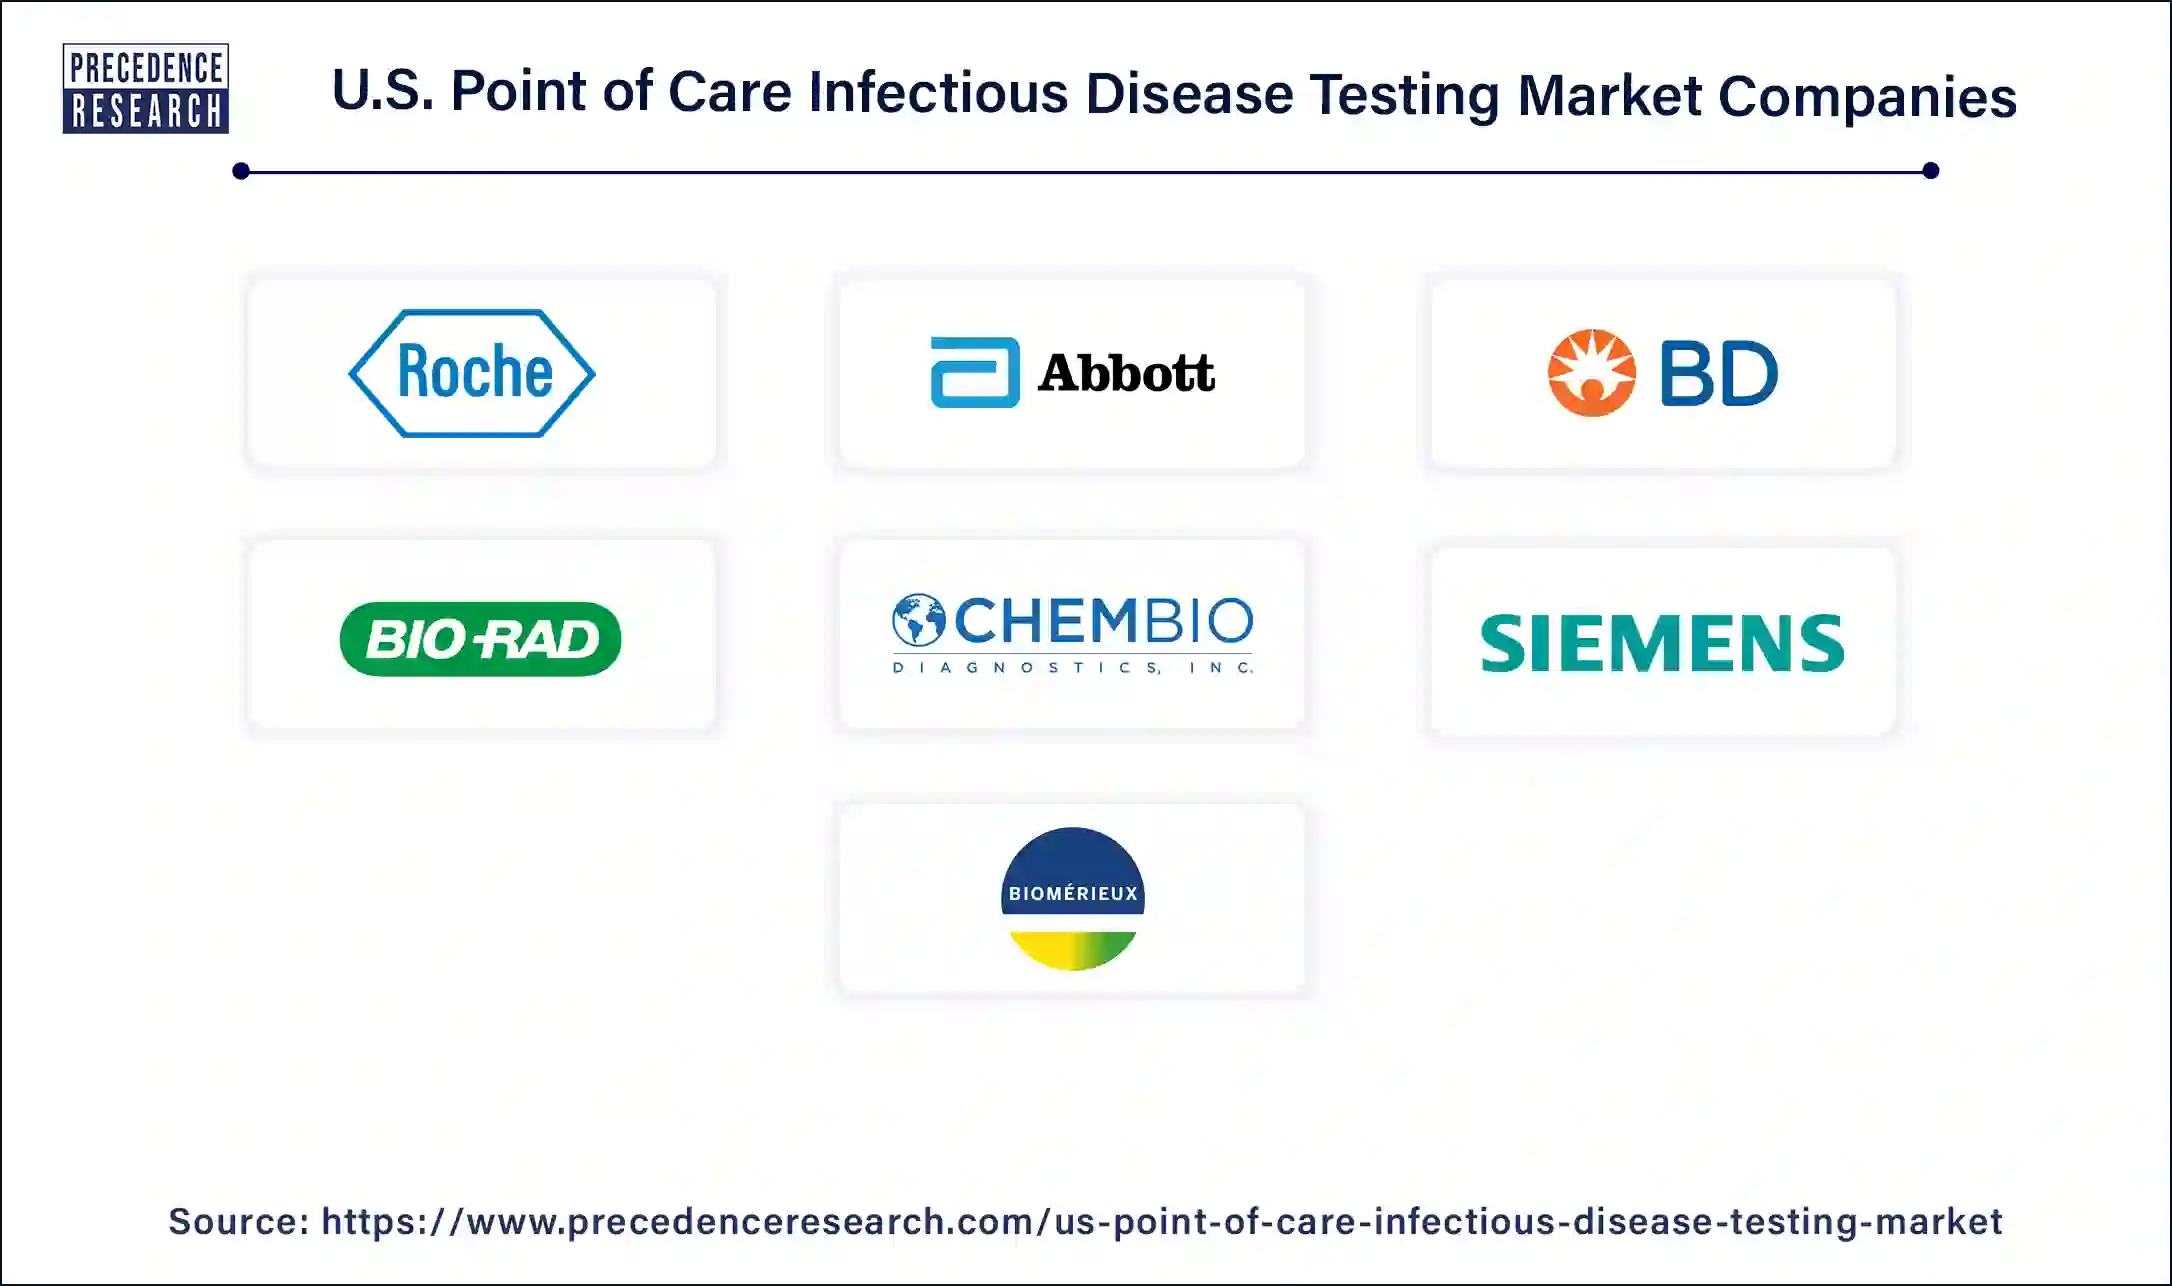 U.S. Point of Care Infectious Disease Testing Companies